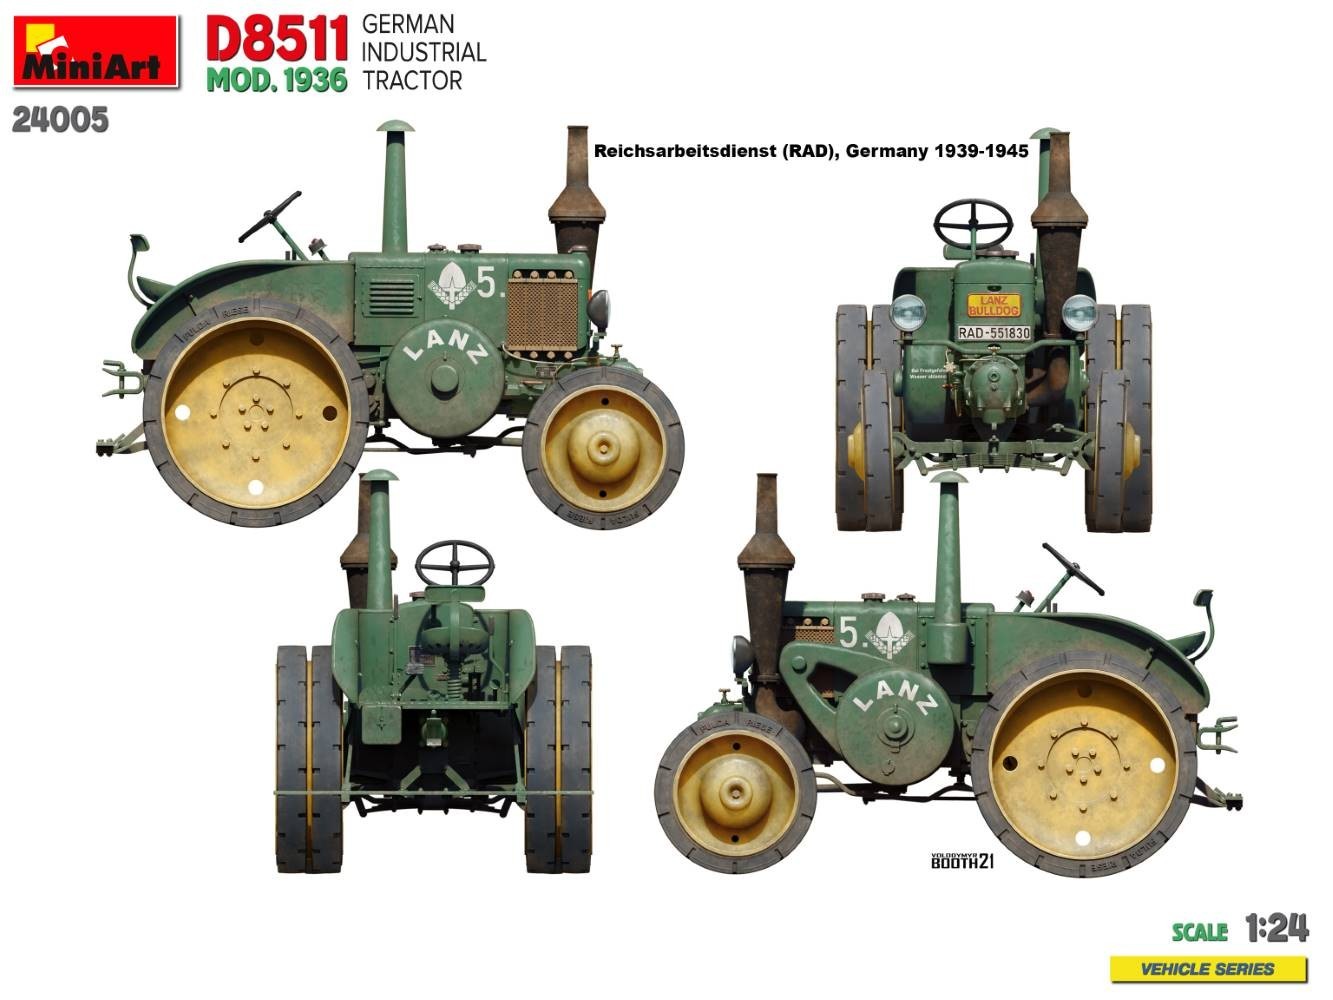 MiniArt 1/24 #24005 German Industrial Tractor D8511 Mod. 1936 Painting and Marking-3